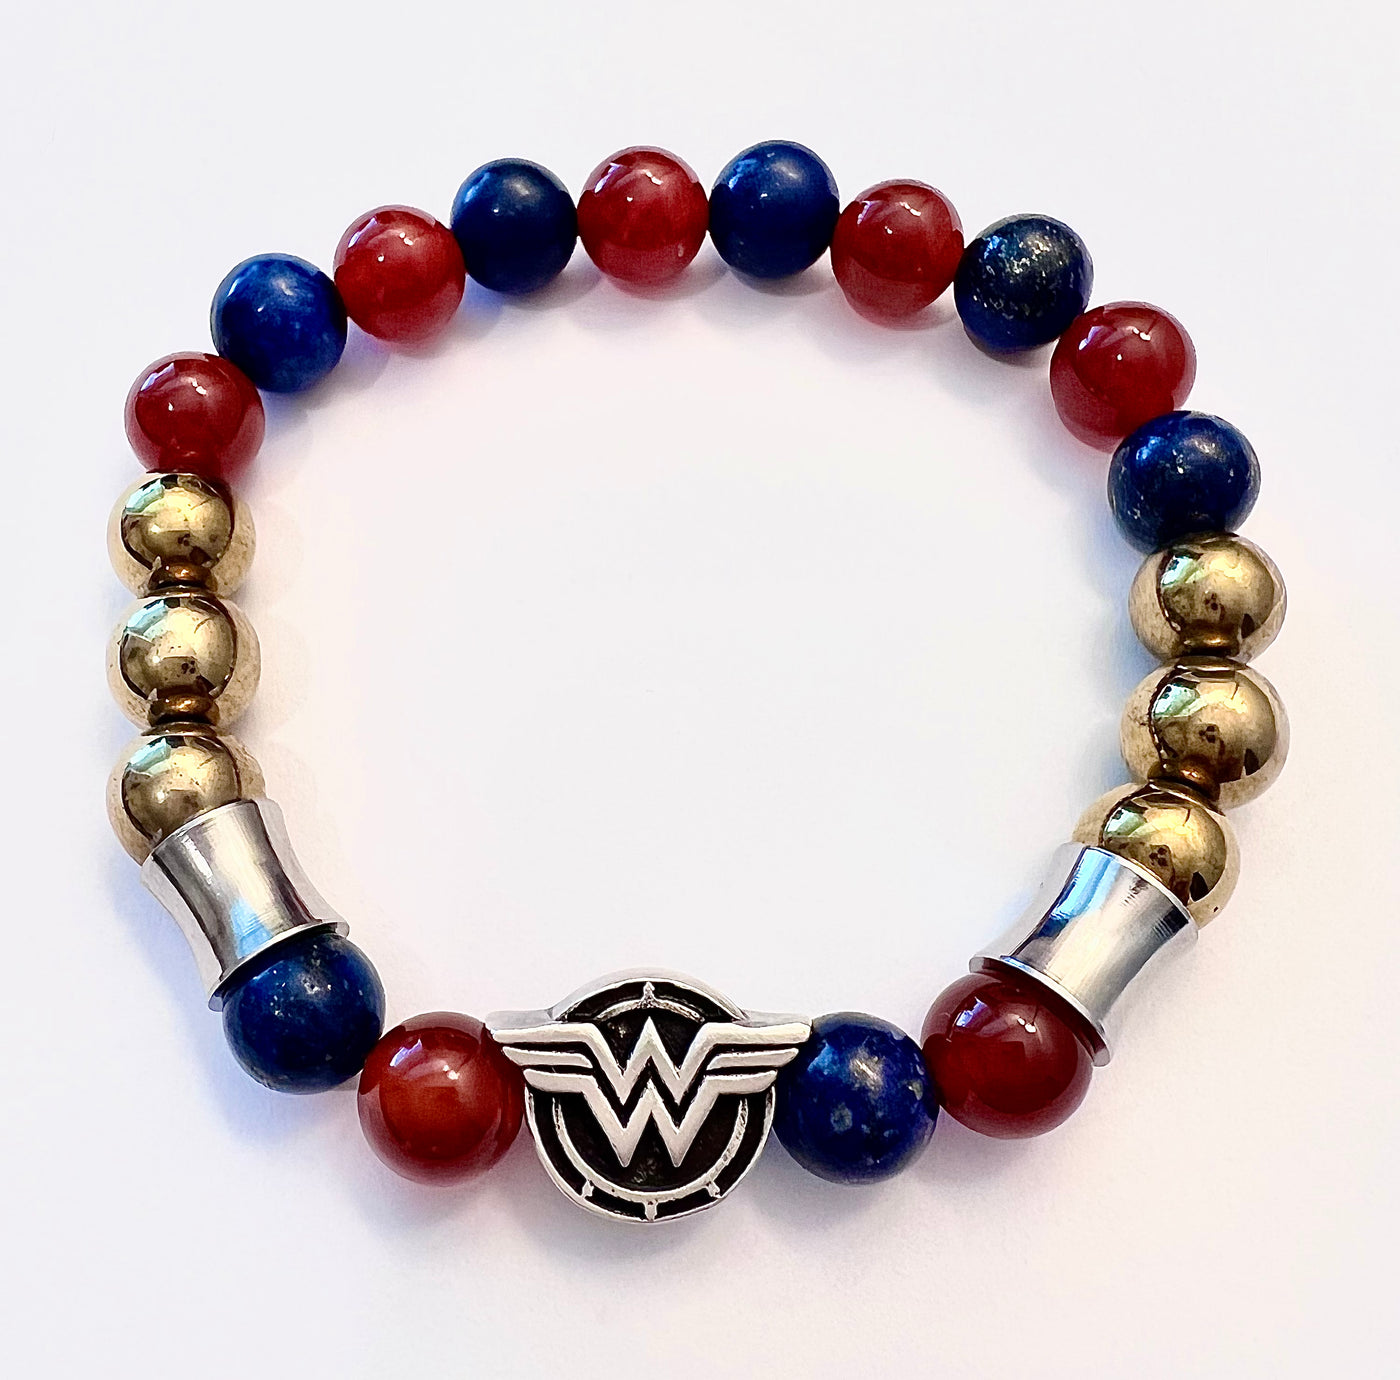 Silver Wonder Woman Charm Bracelet with Red, Blue and Gold Beads - Brent's Bling